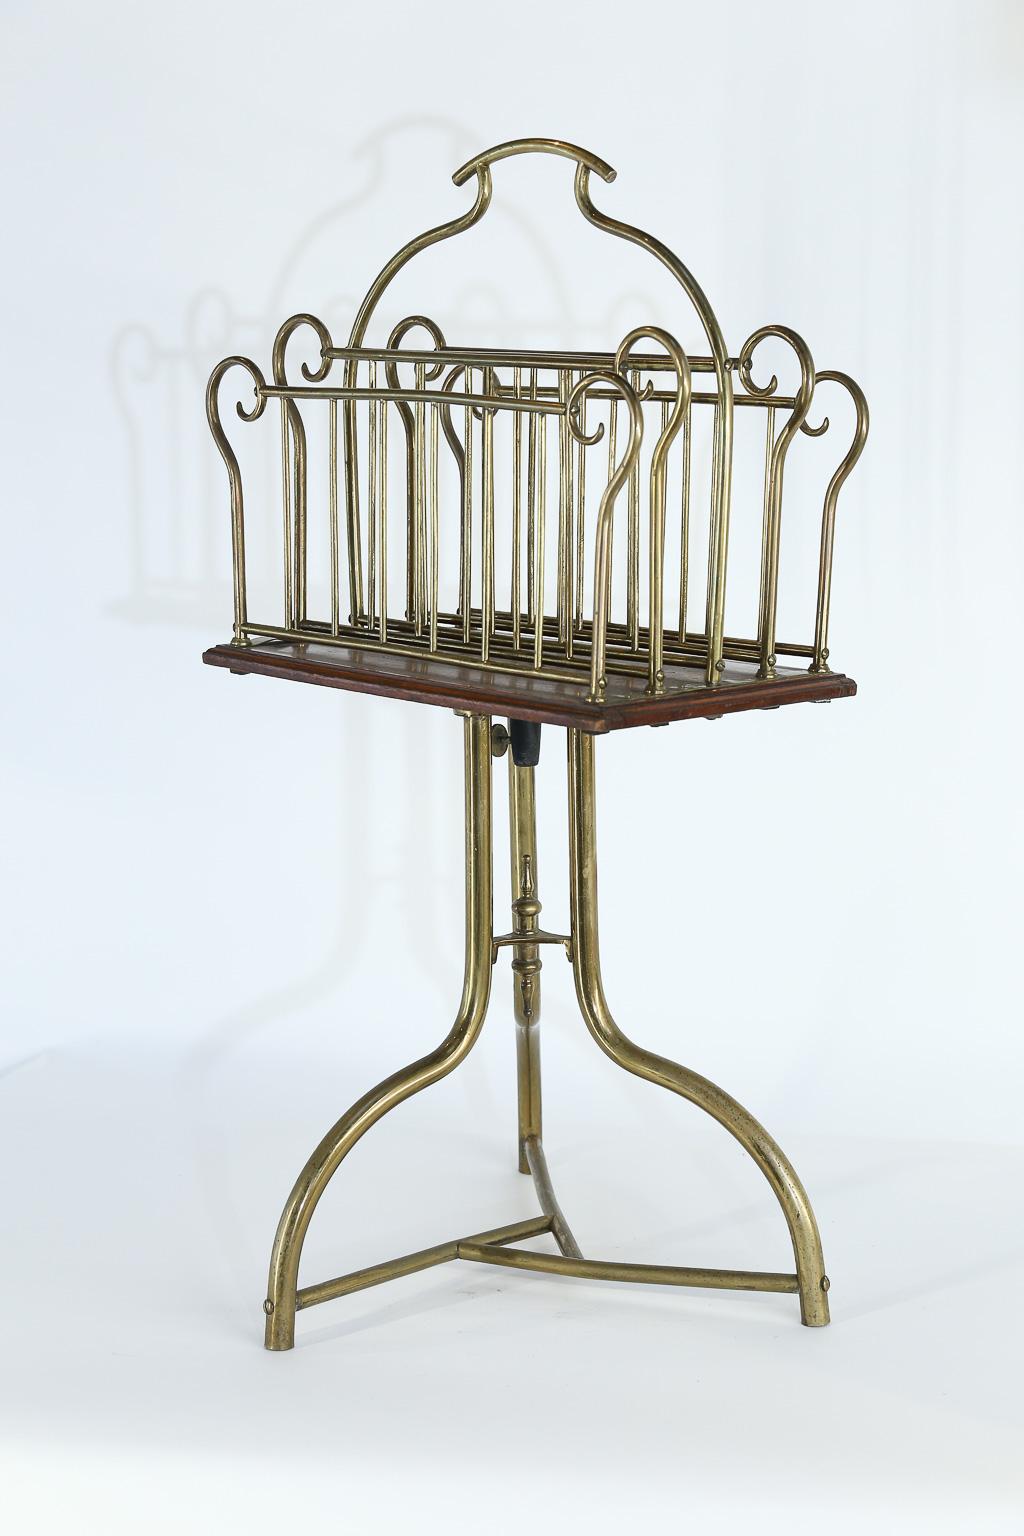 Found in France and made of brass and wood, this magazine holder is both functional and beautiful. Standing on a tripod base, the top portion turns 360 degrees for easy magazine access. This piece will add a touch of midcentury charm to any room.